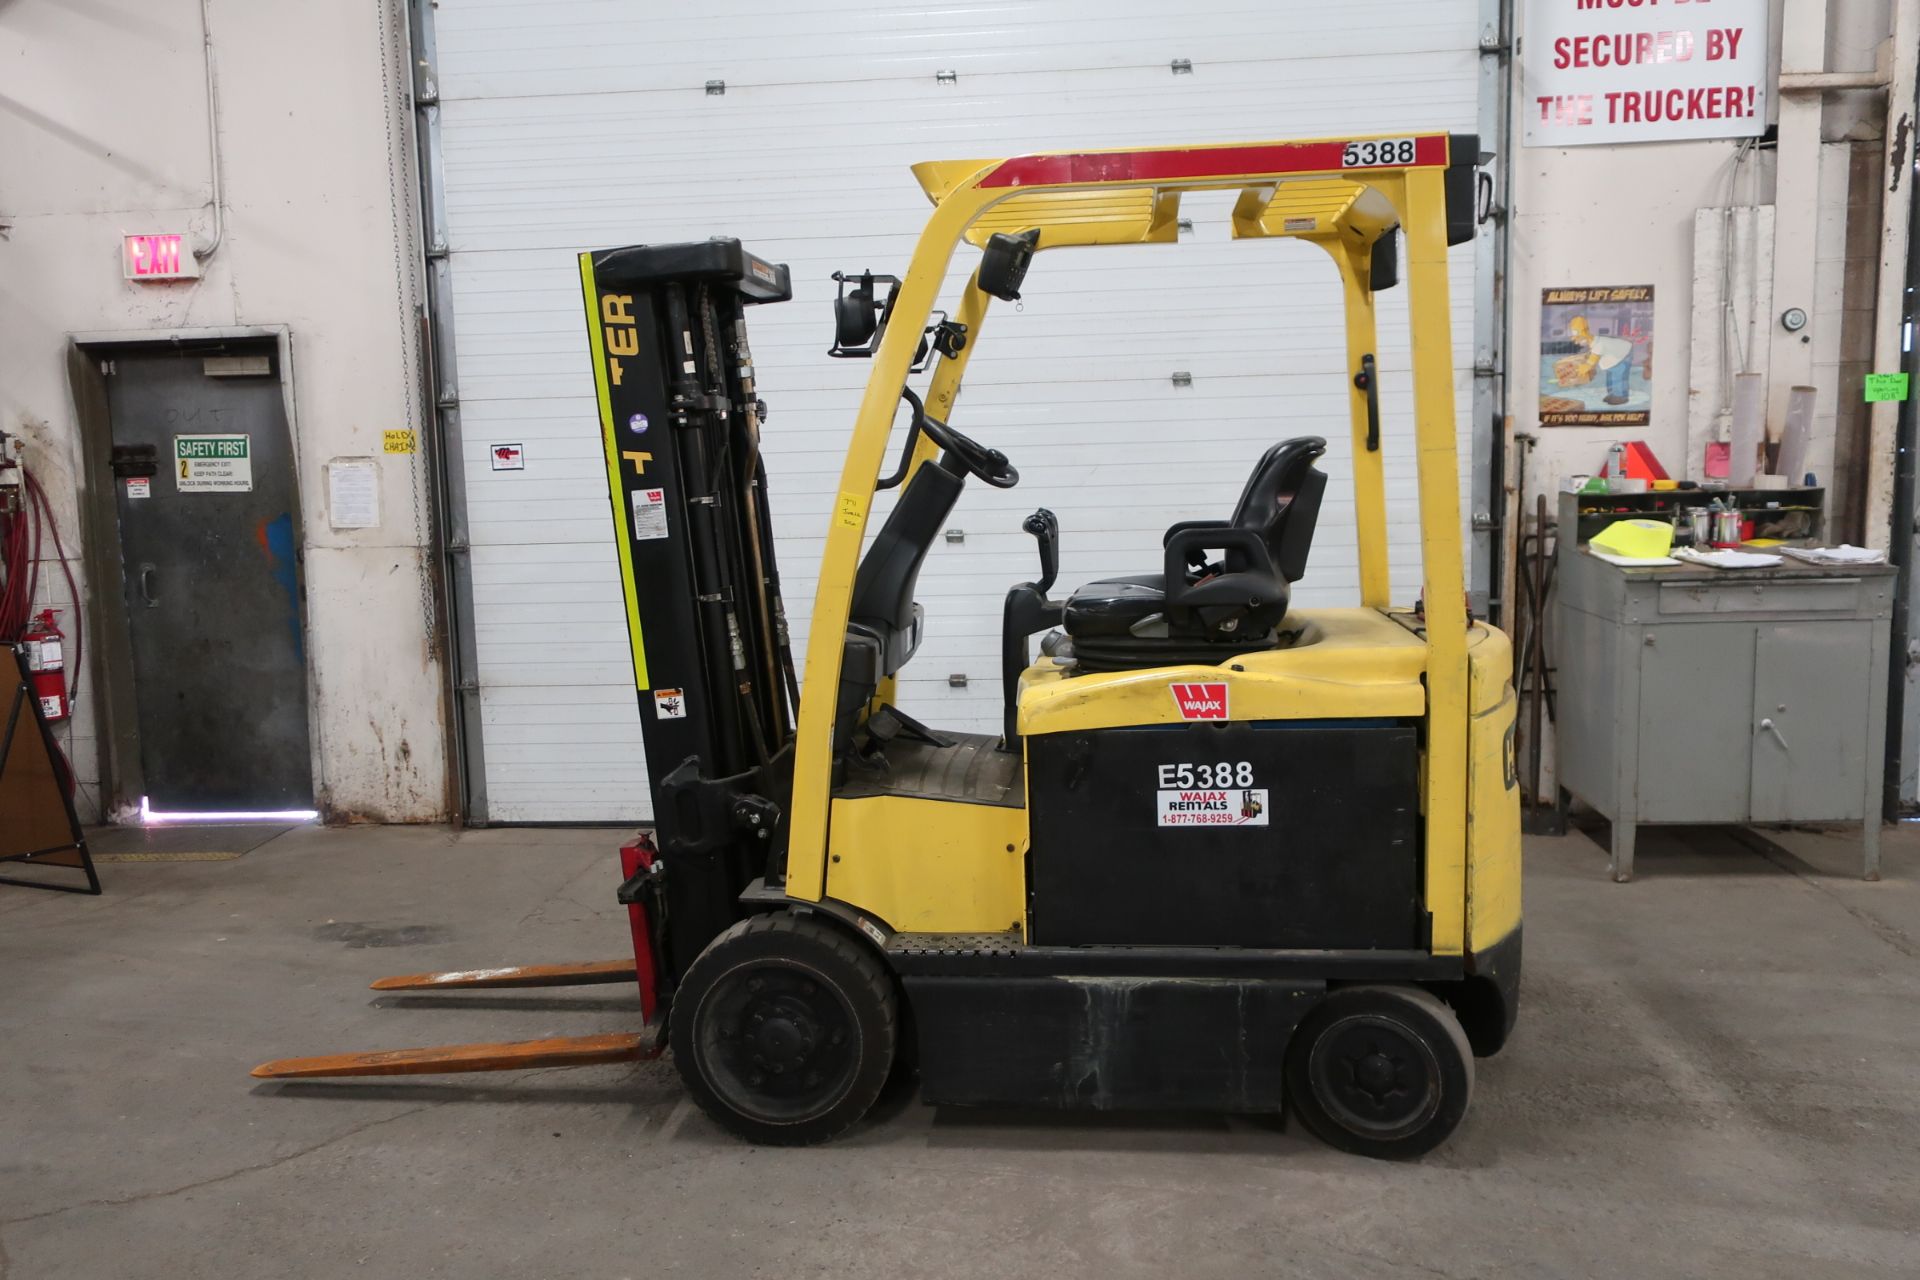 FREE CUSTOMS - 2012 Hyster 5000lbs Capacity Forklift with 3-stage mast - ELECTRIC with sideshift